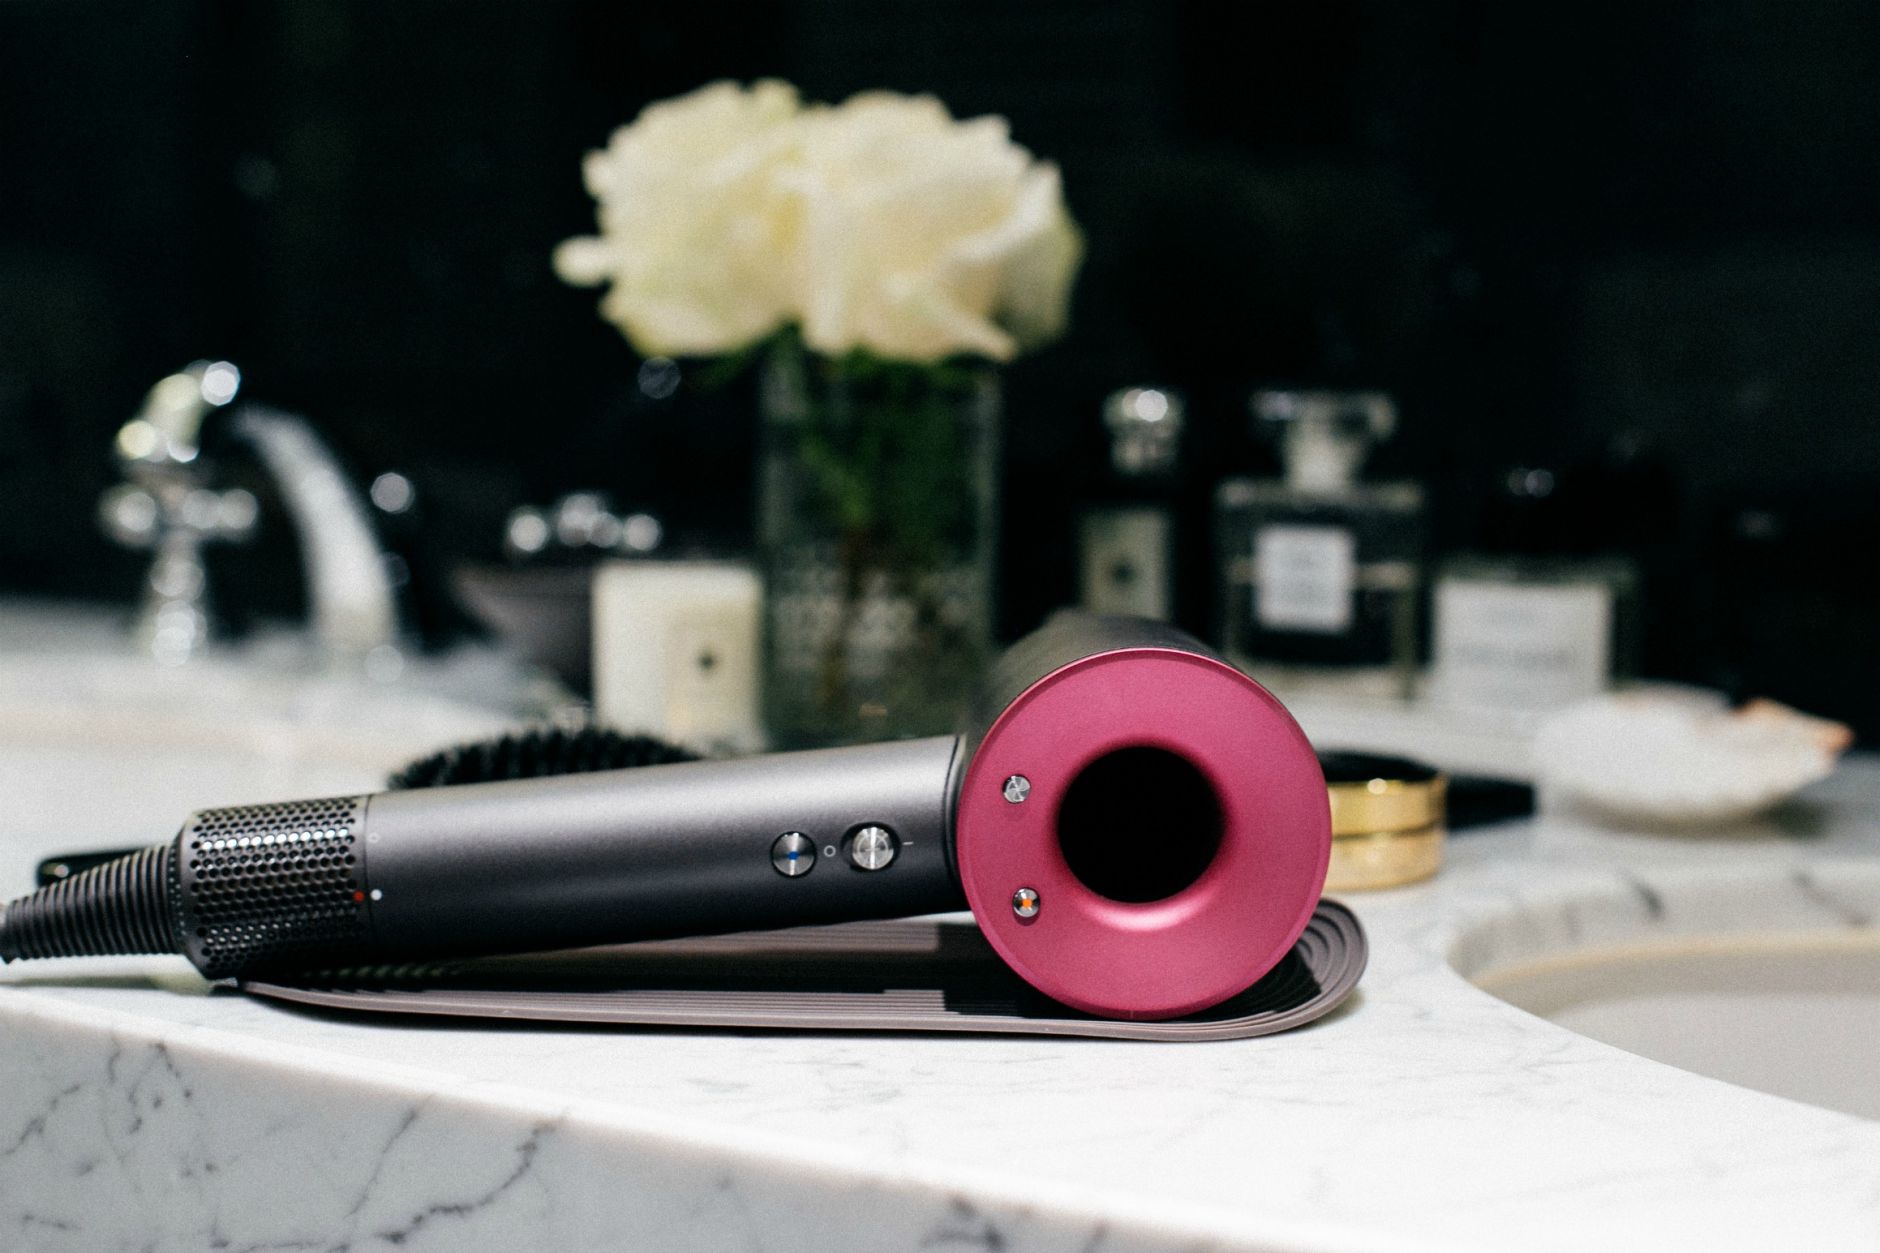 THE SUPER HAIR DRYER THAT I CANNOT LIVE WITHOUT